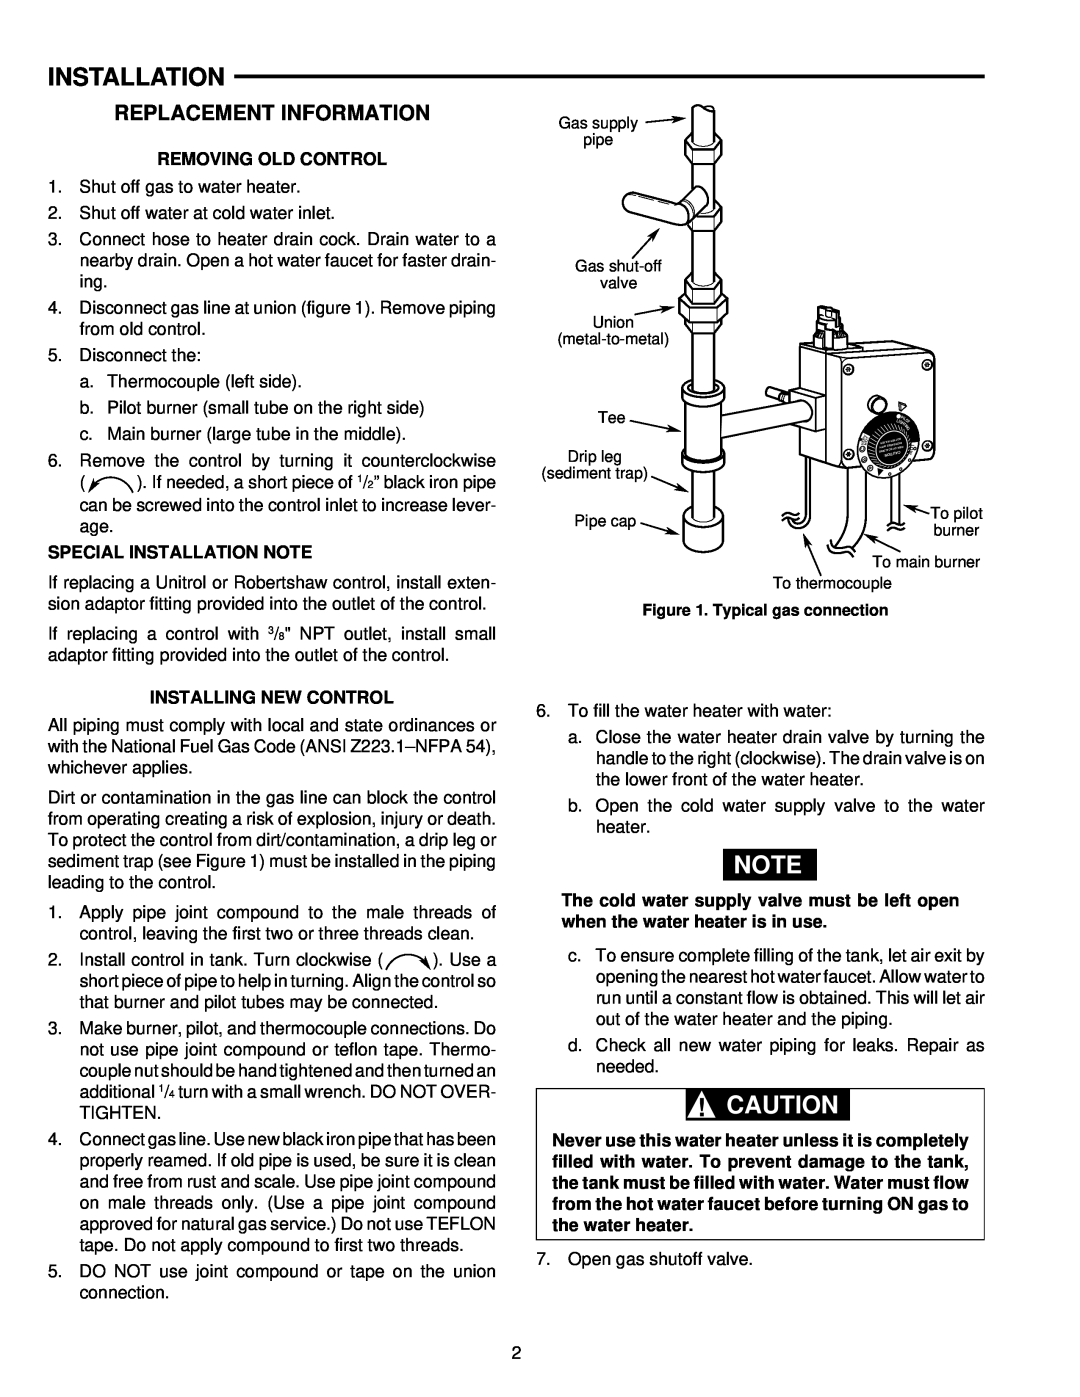 White Rodgers 37C73U installation instructions Installation, Replacement Information 